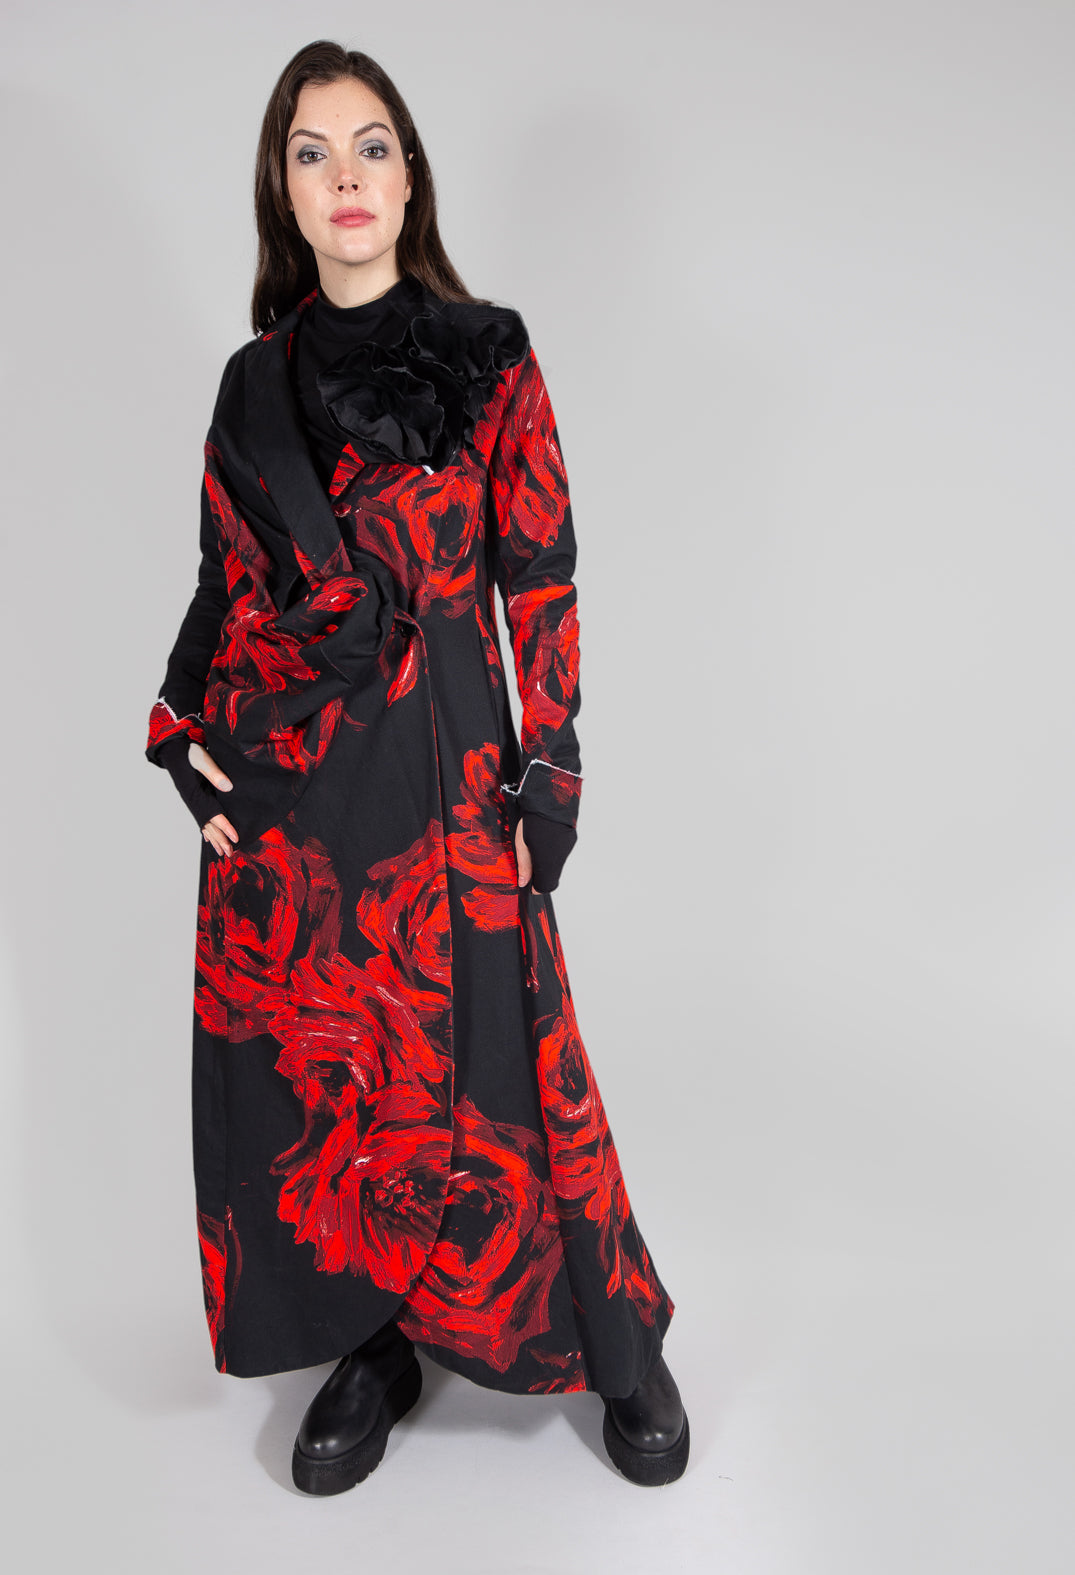 Bold Print Coat in Black and Red